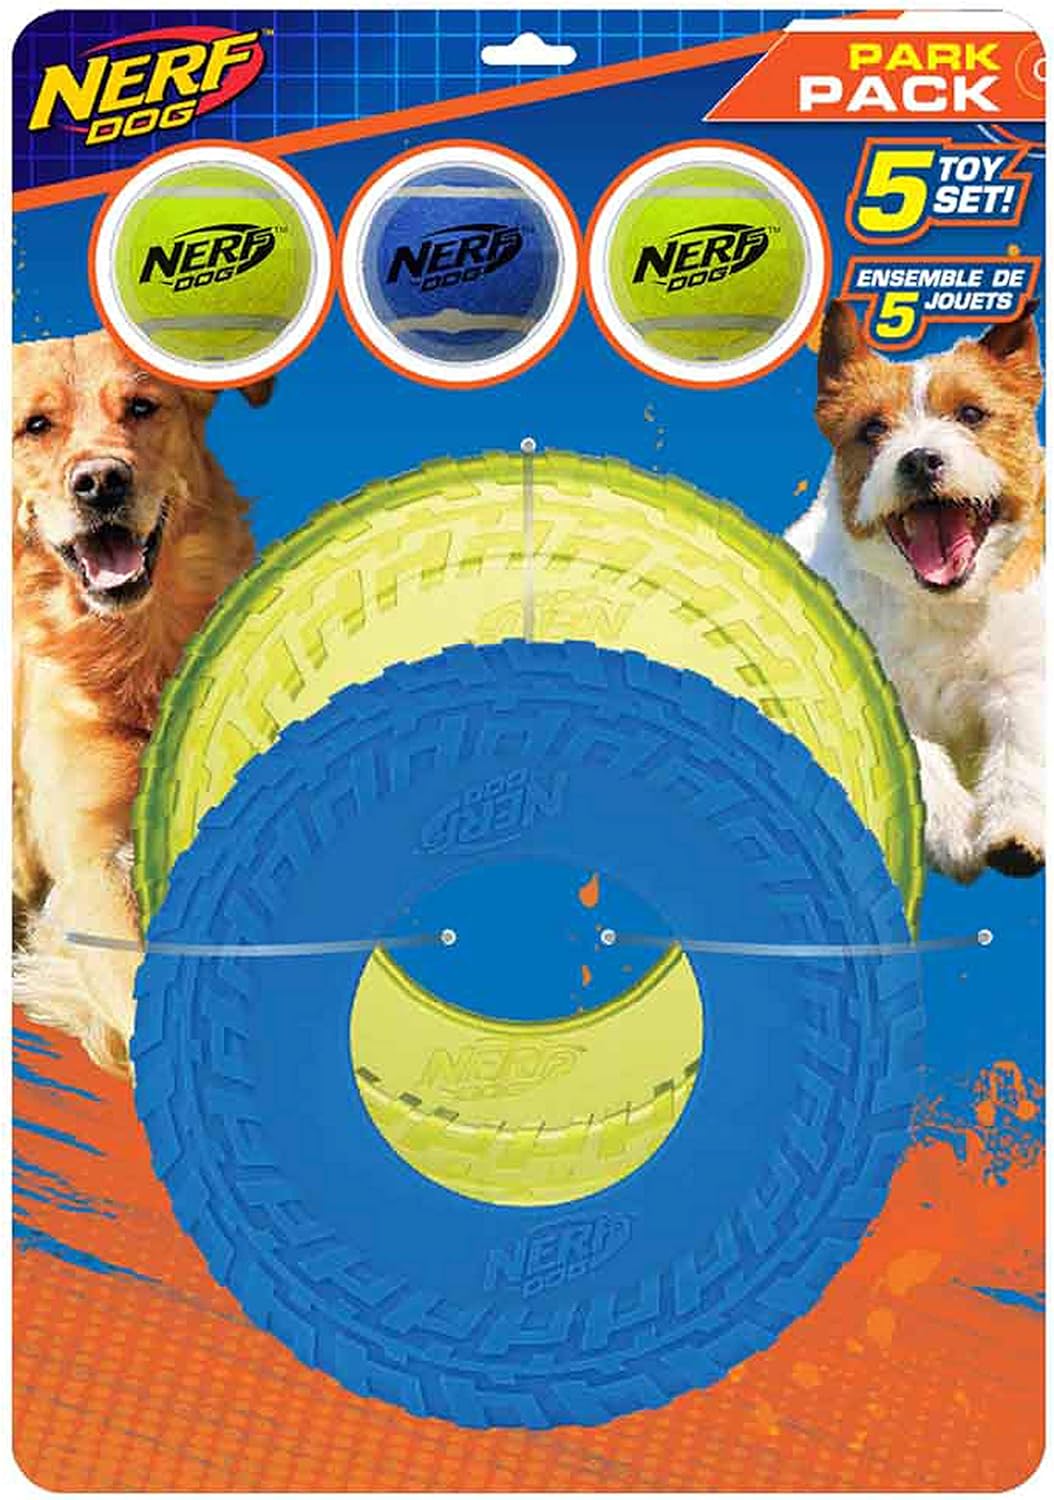 Nerf Dog 5-Piece Dog Toy Gift Set, Includes 2.5in Squeak Tennis Ball 3-Pack, 10in Translucent TPR Tire Flyer, and 10in TPR Tire Flyer, Nerf Tough Material, Green and Blue